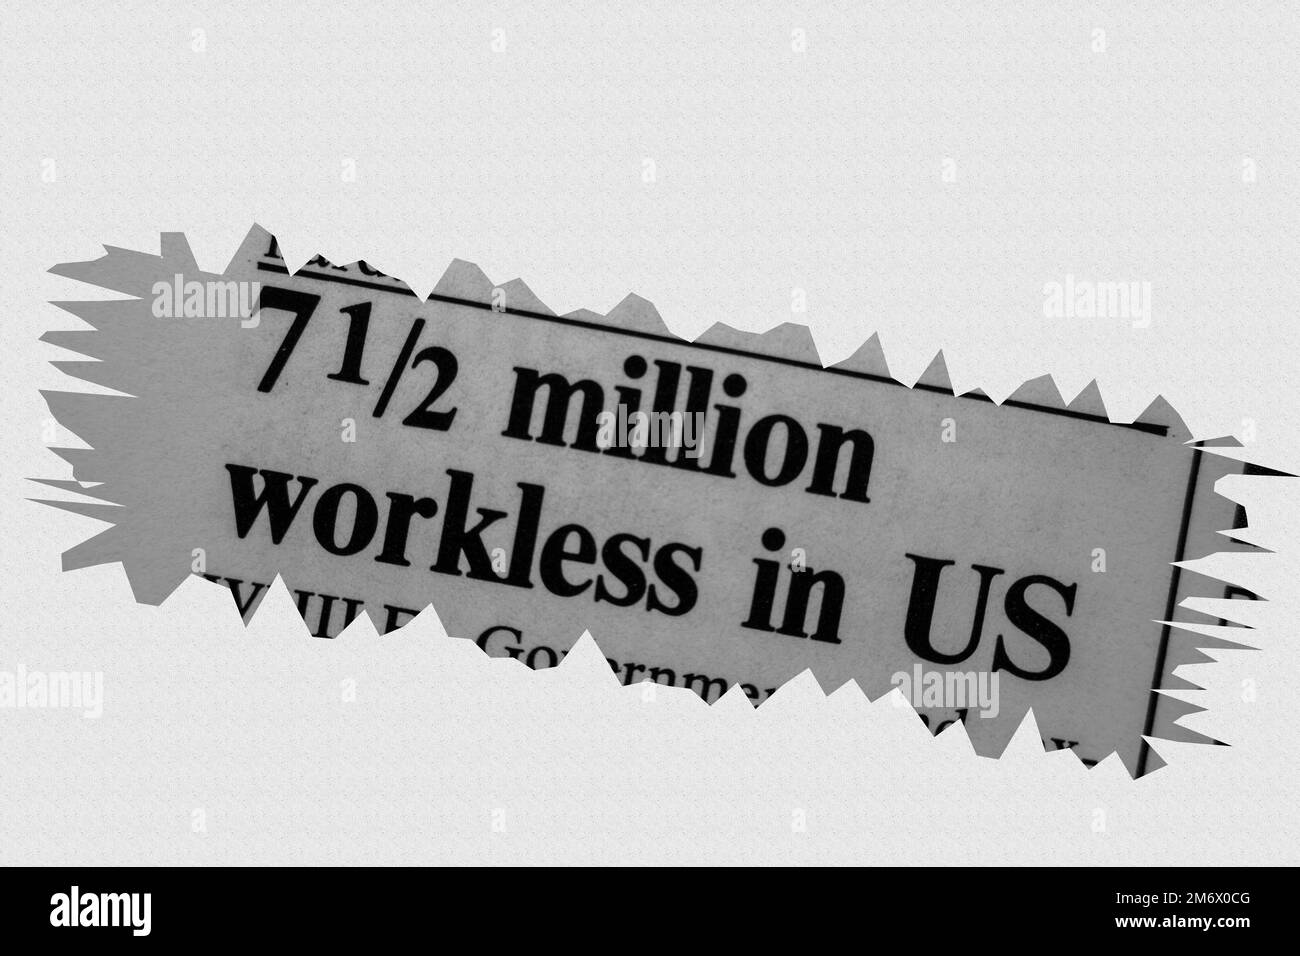 7.5 million workless in US  - news story from 1975 newspaper headline article title with overlay Stock Photo